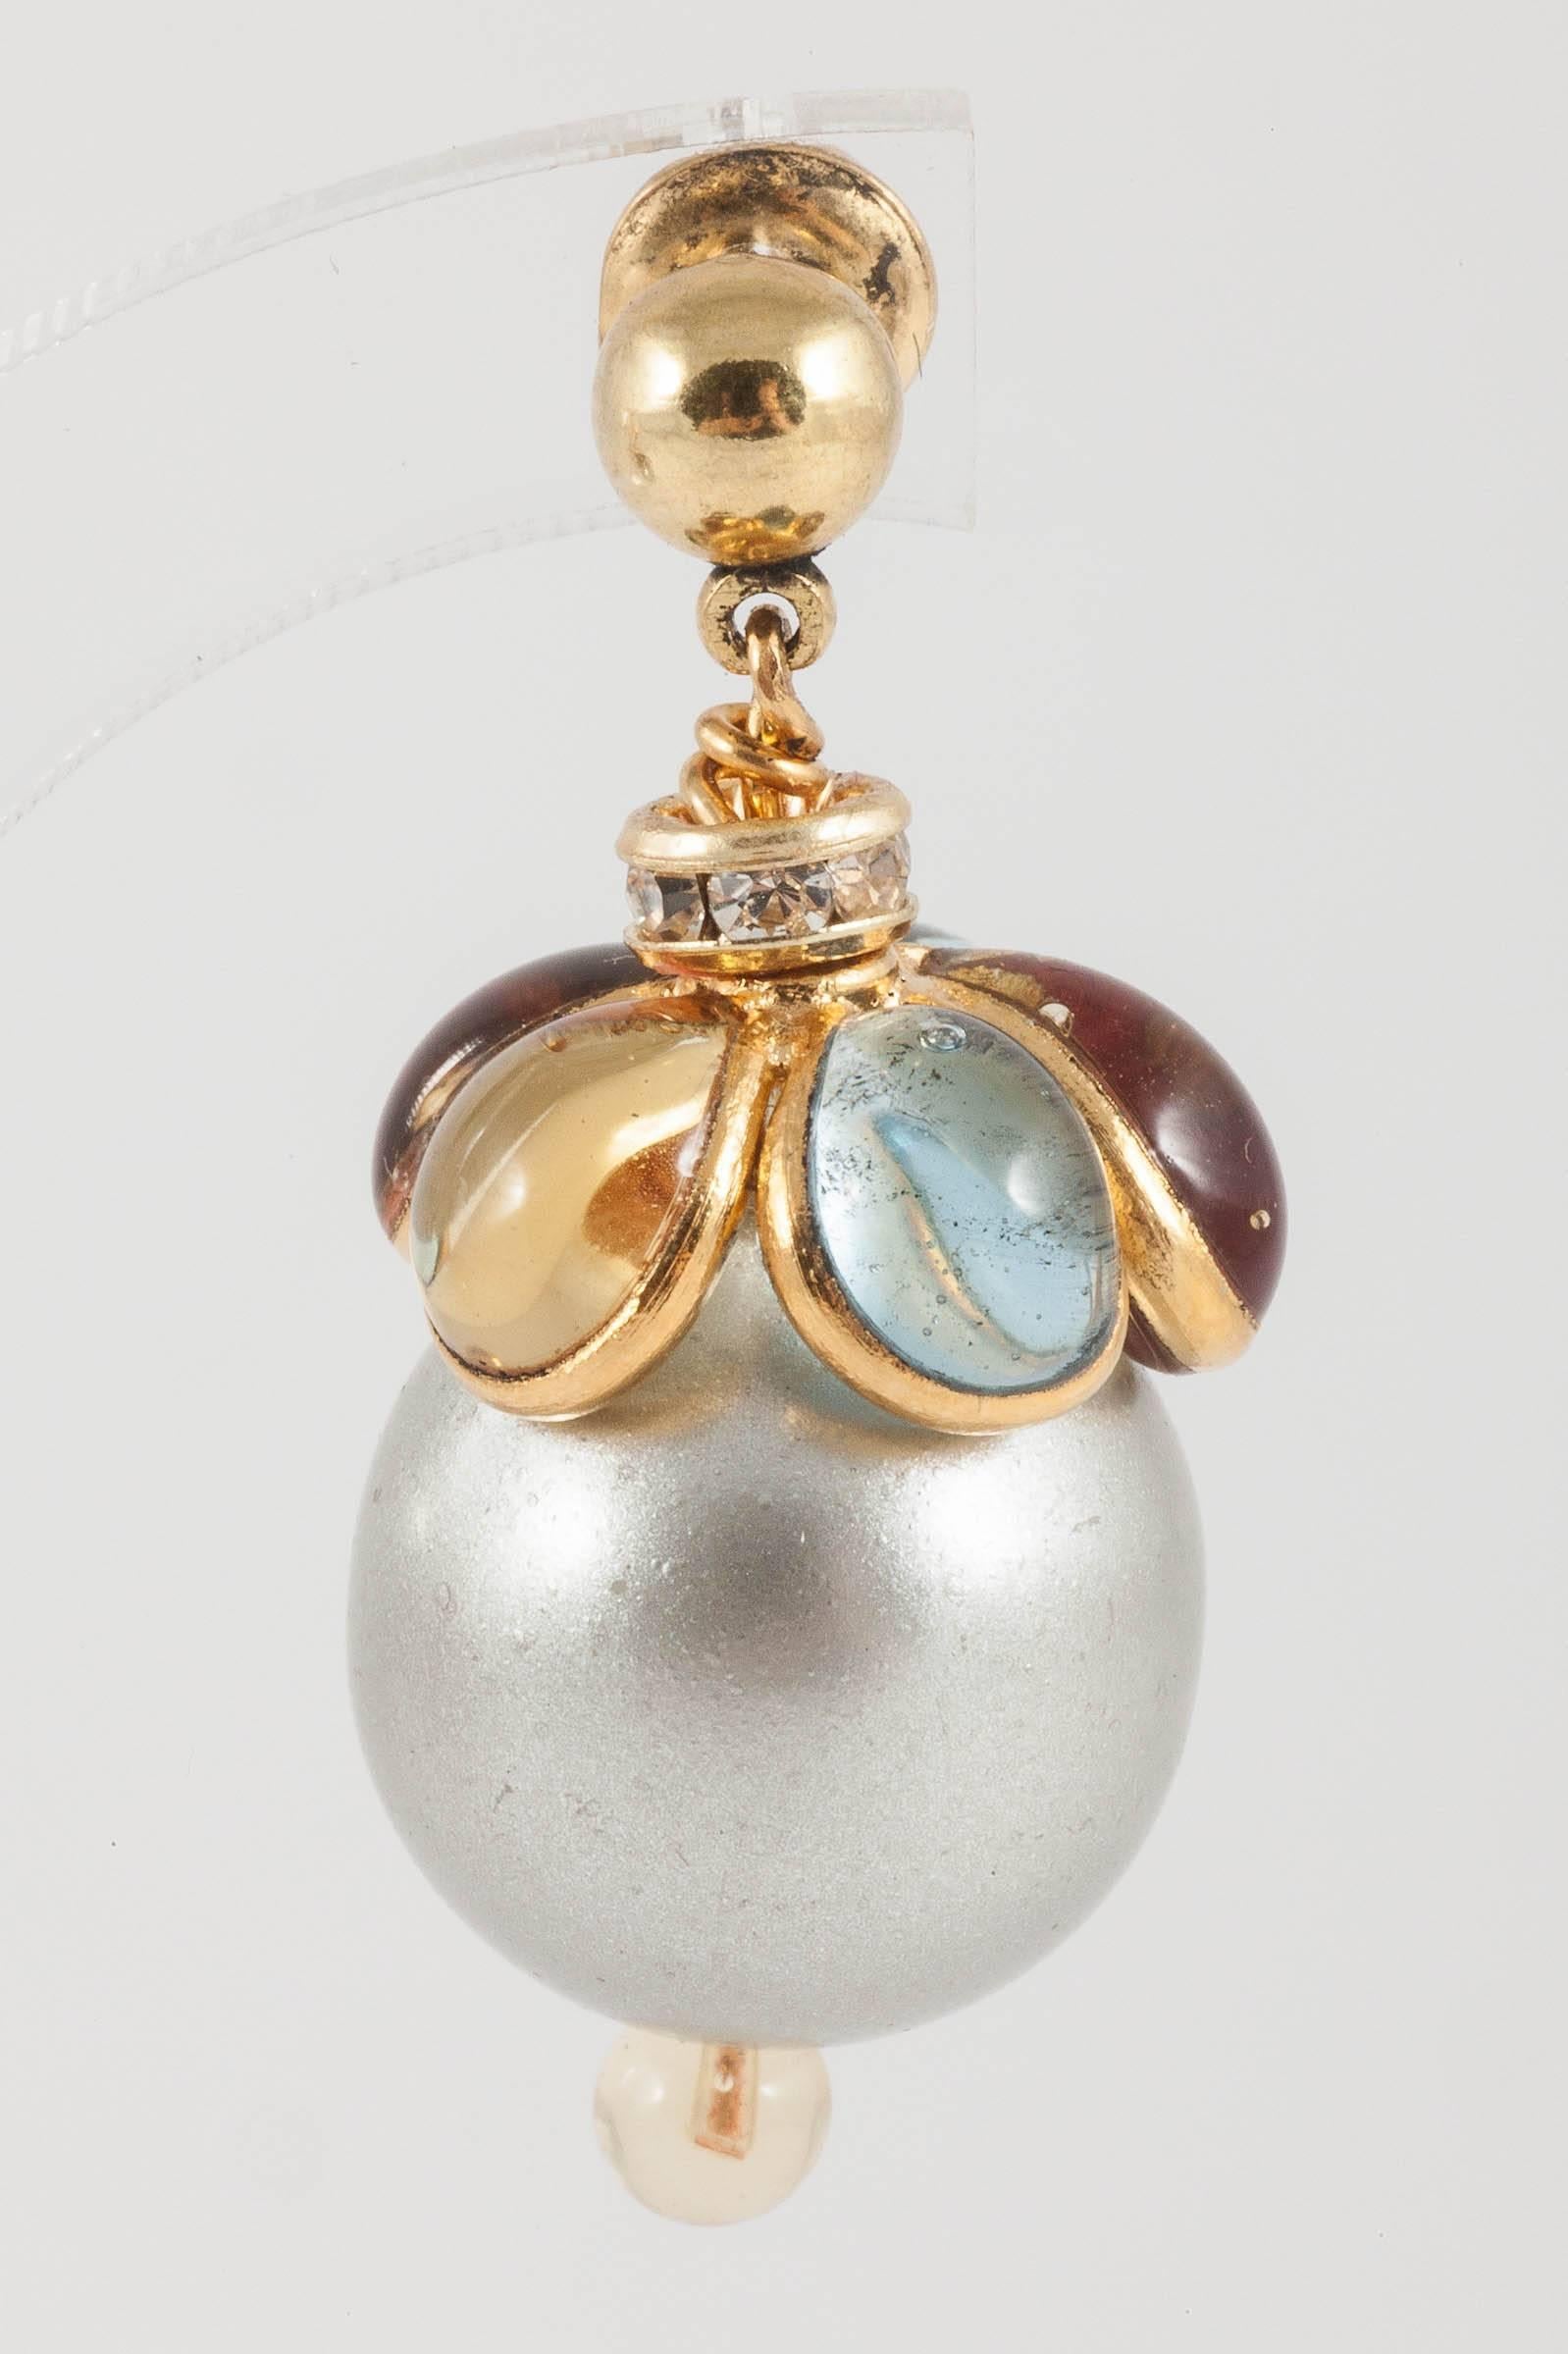 Delicate and delightful drop gilt earrings, with a grey pearl, capped in citrine and aquamarine poured glass petals, and a citrine poured glass bead underneath the pearl to highlight and finish off.Light and easy to wear. From the WW collection, a